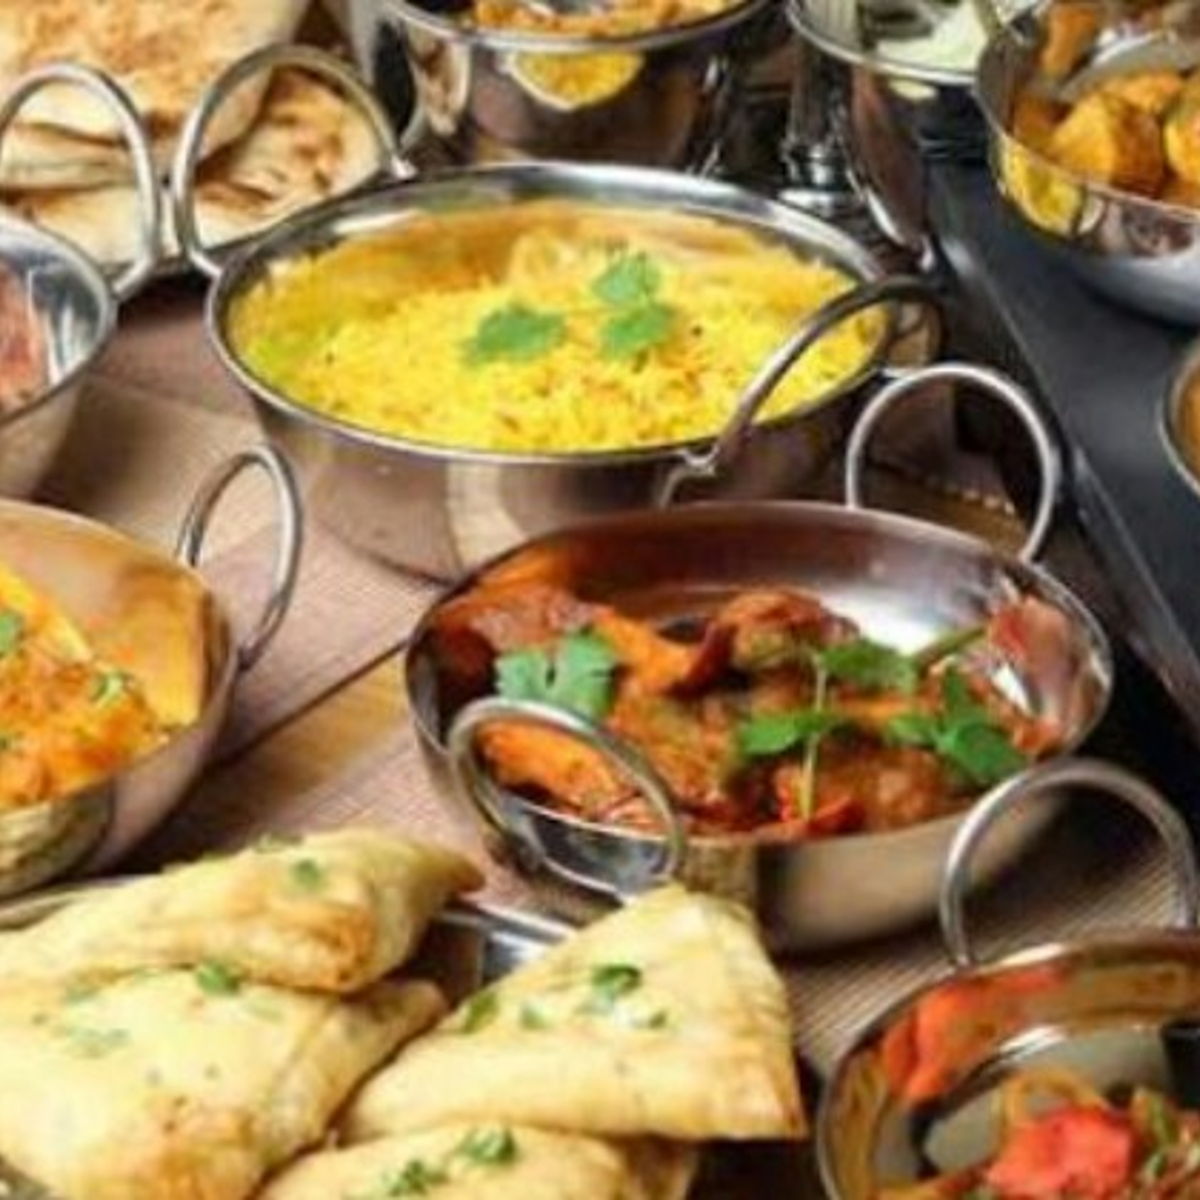 Eat an Authentic Meal with a Rajasthani Family